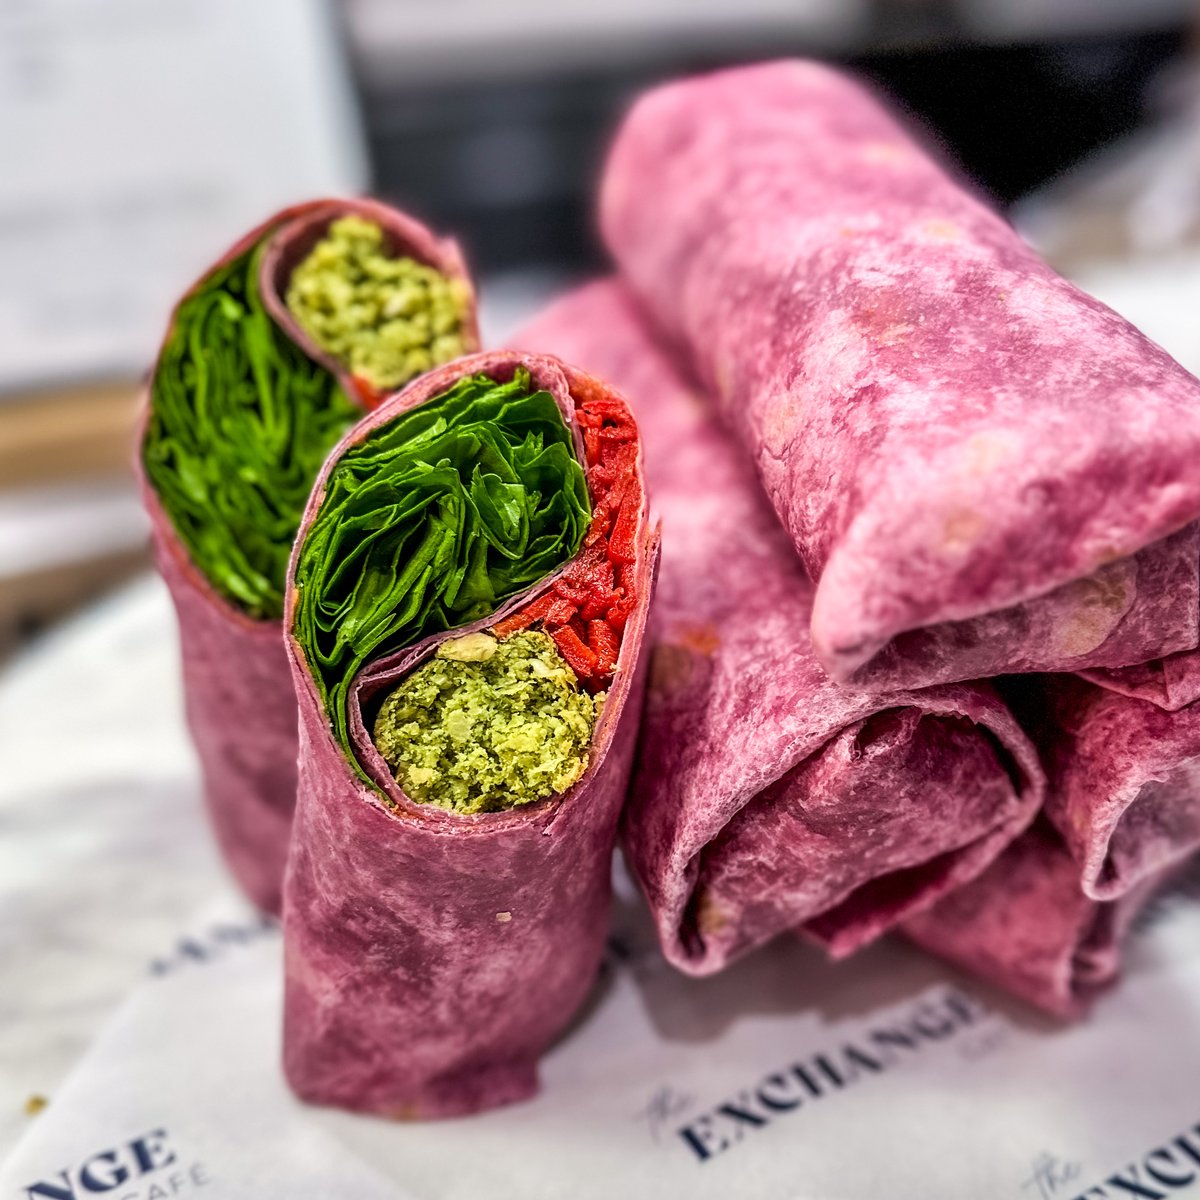 Bursting with flavour and colour! Dig into one of our delicious vegan wraps 🤤 #eatwell #havefun #promisesdelivered